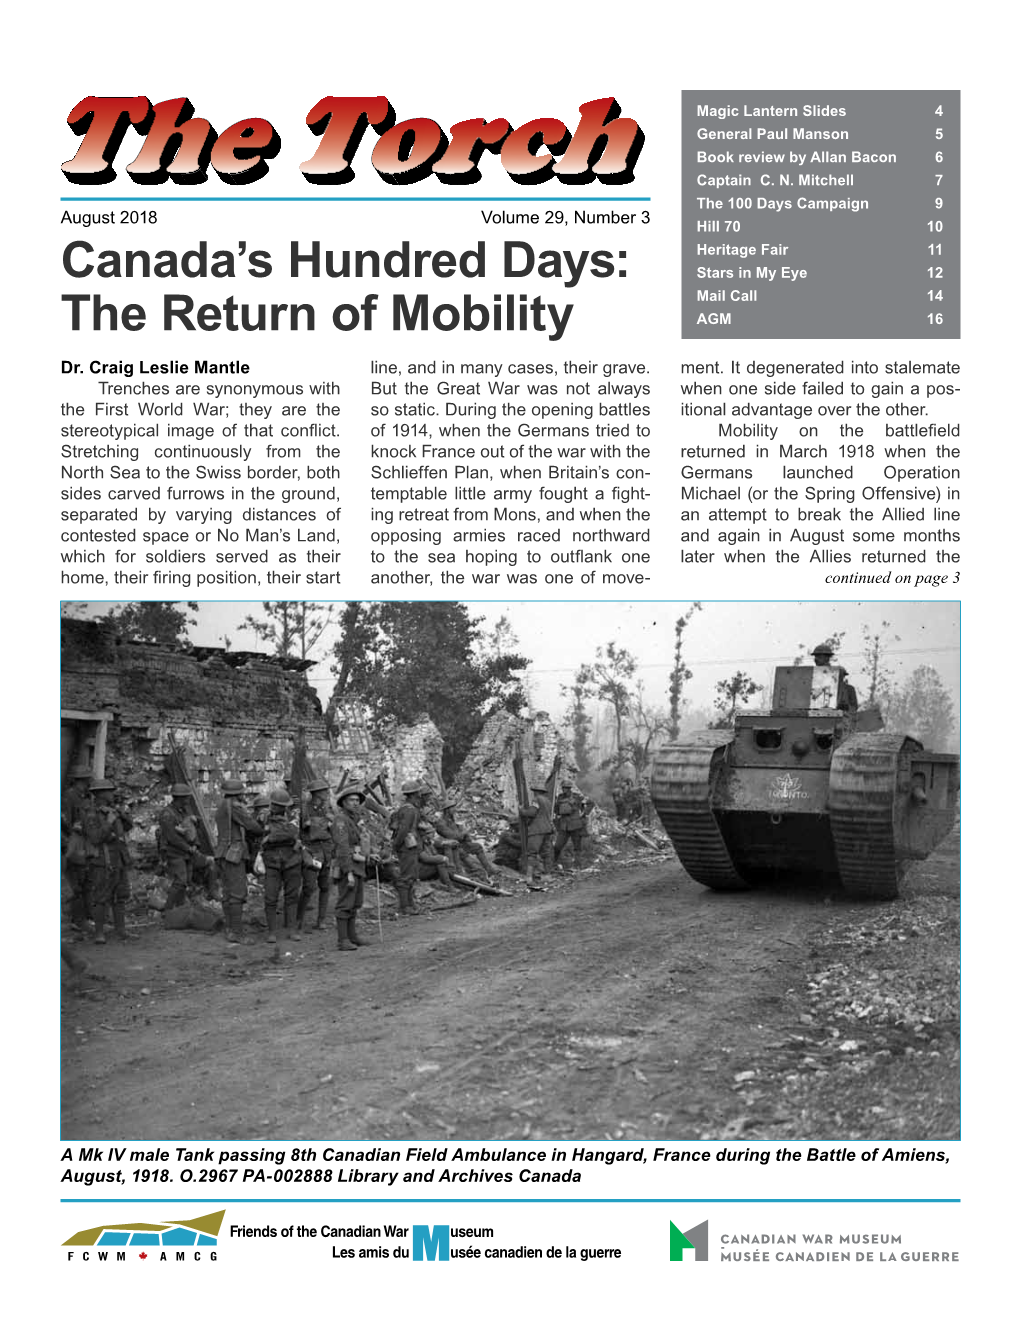 Canada's Hundred Days: the Return of Mobility